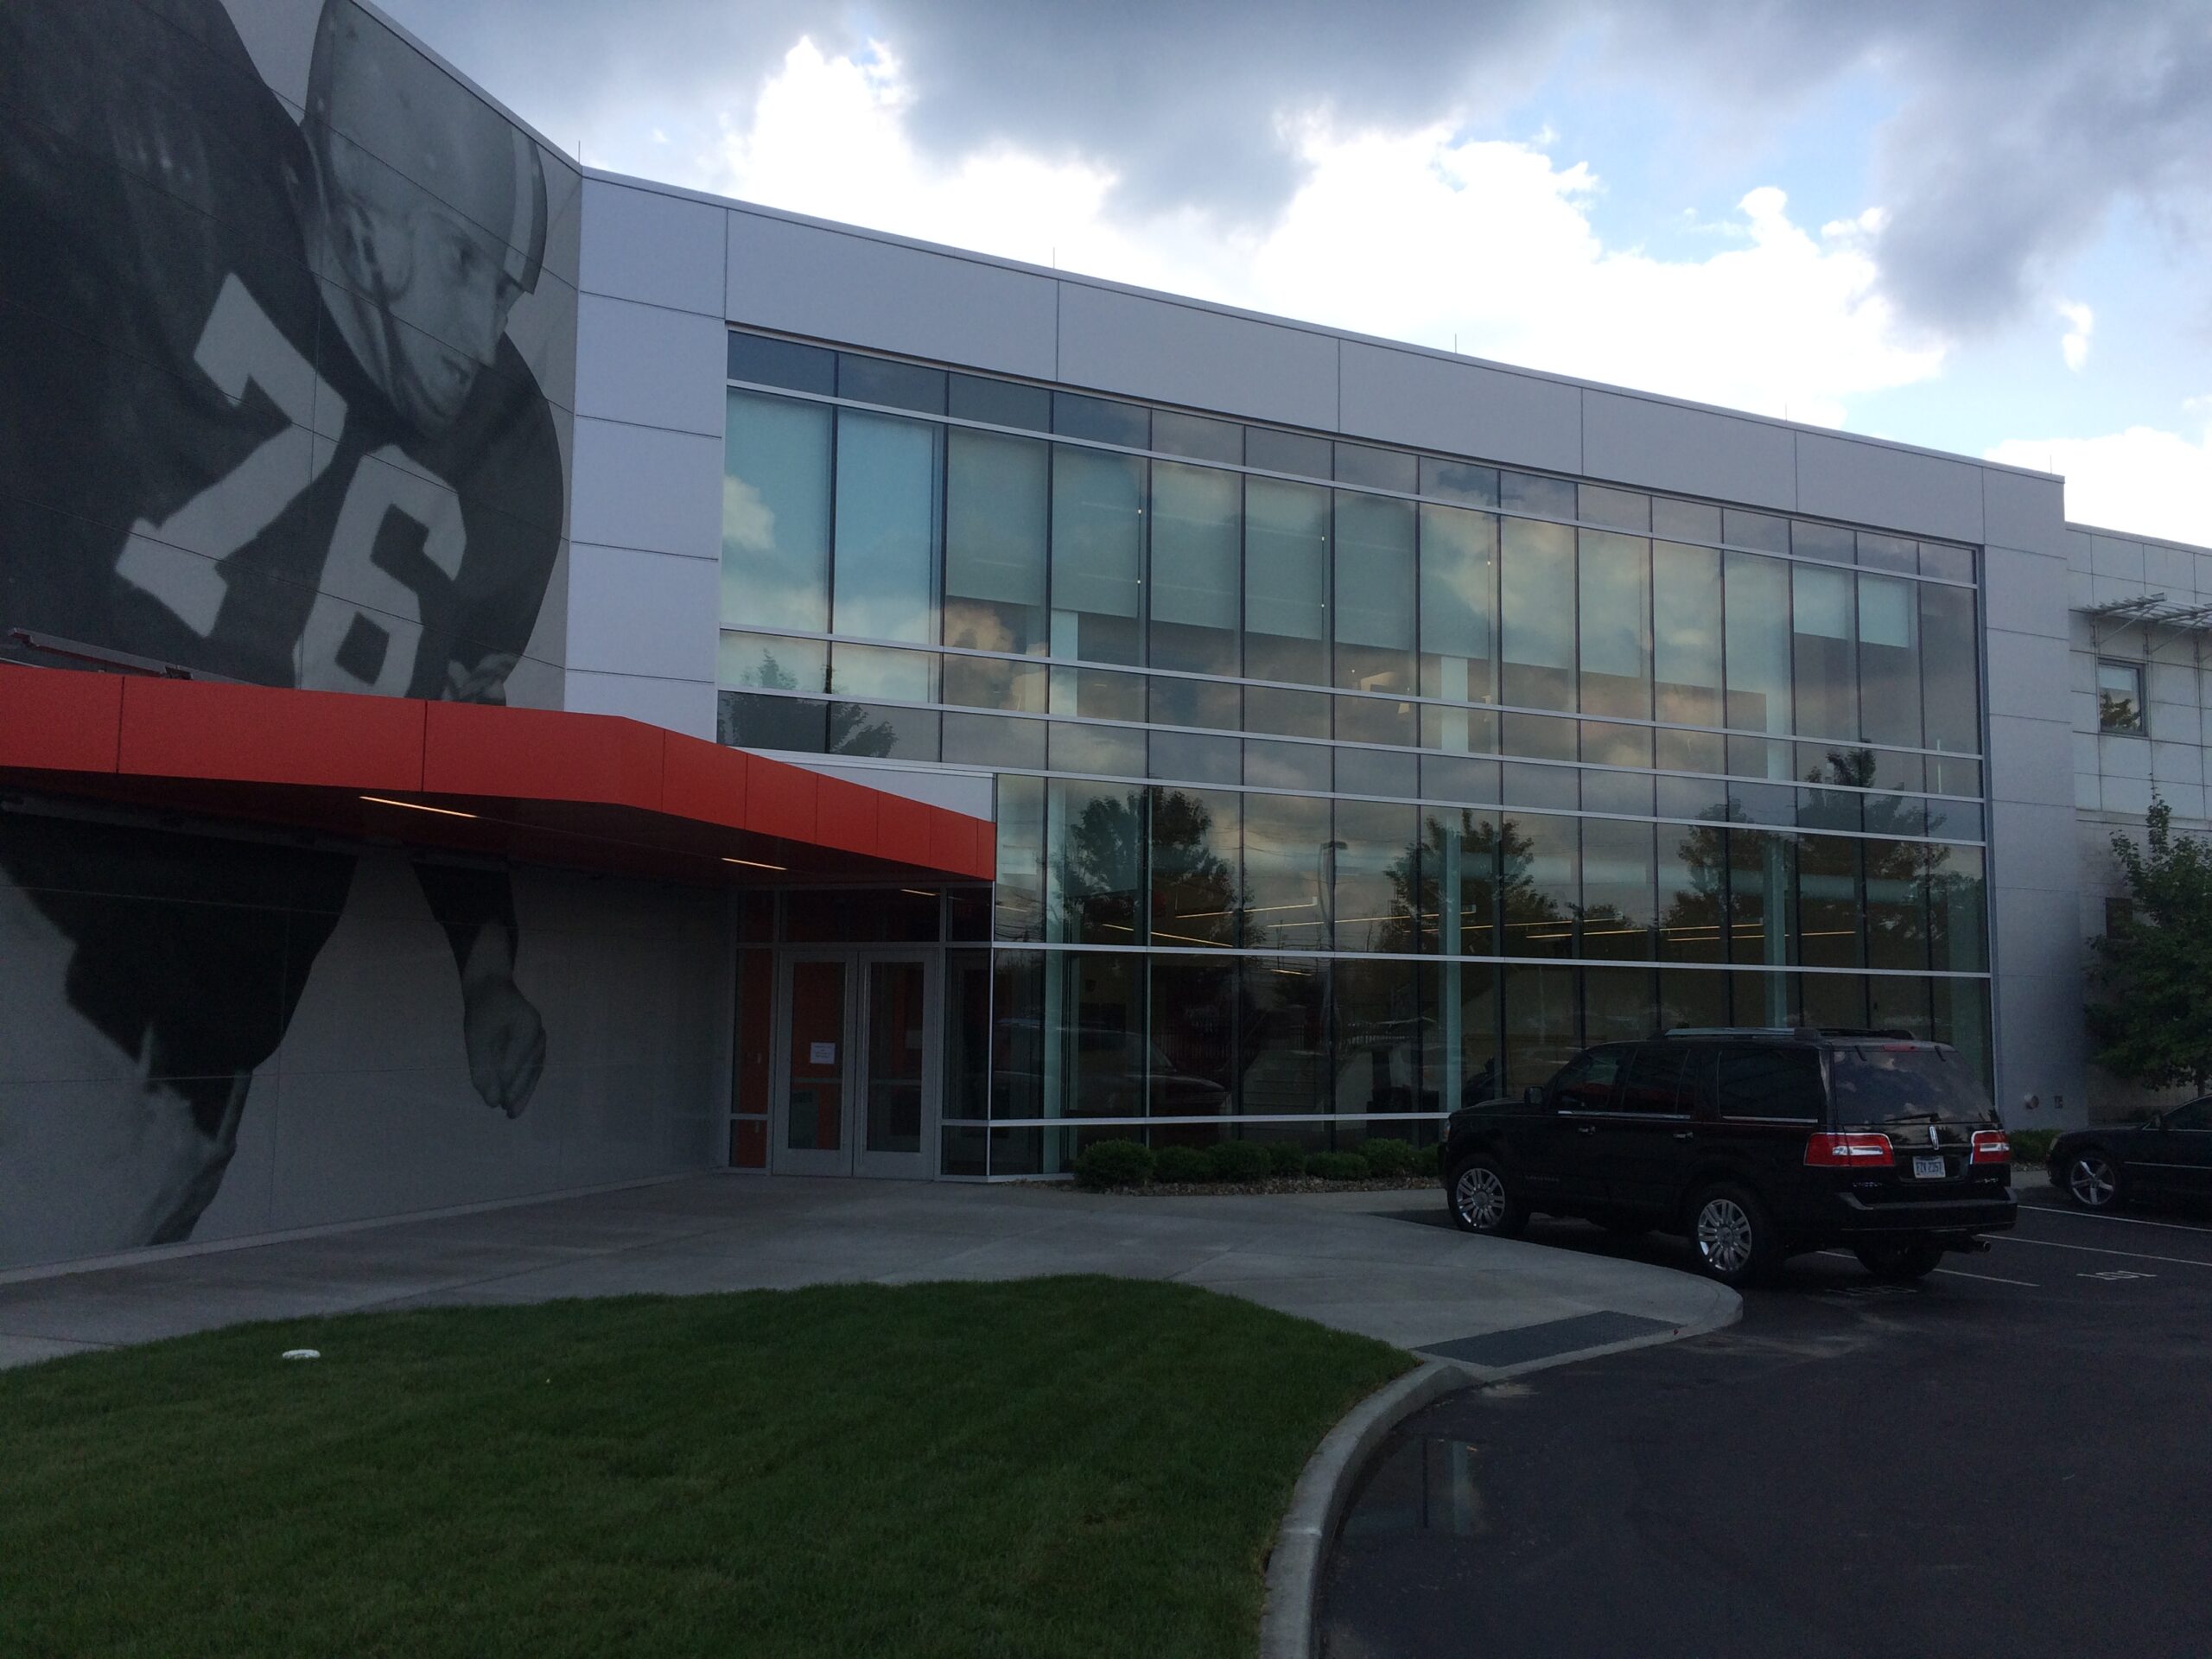 Cleveland Browns Training Facility 7 scaled